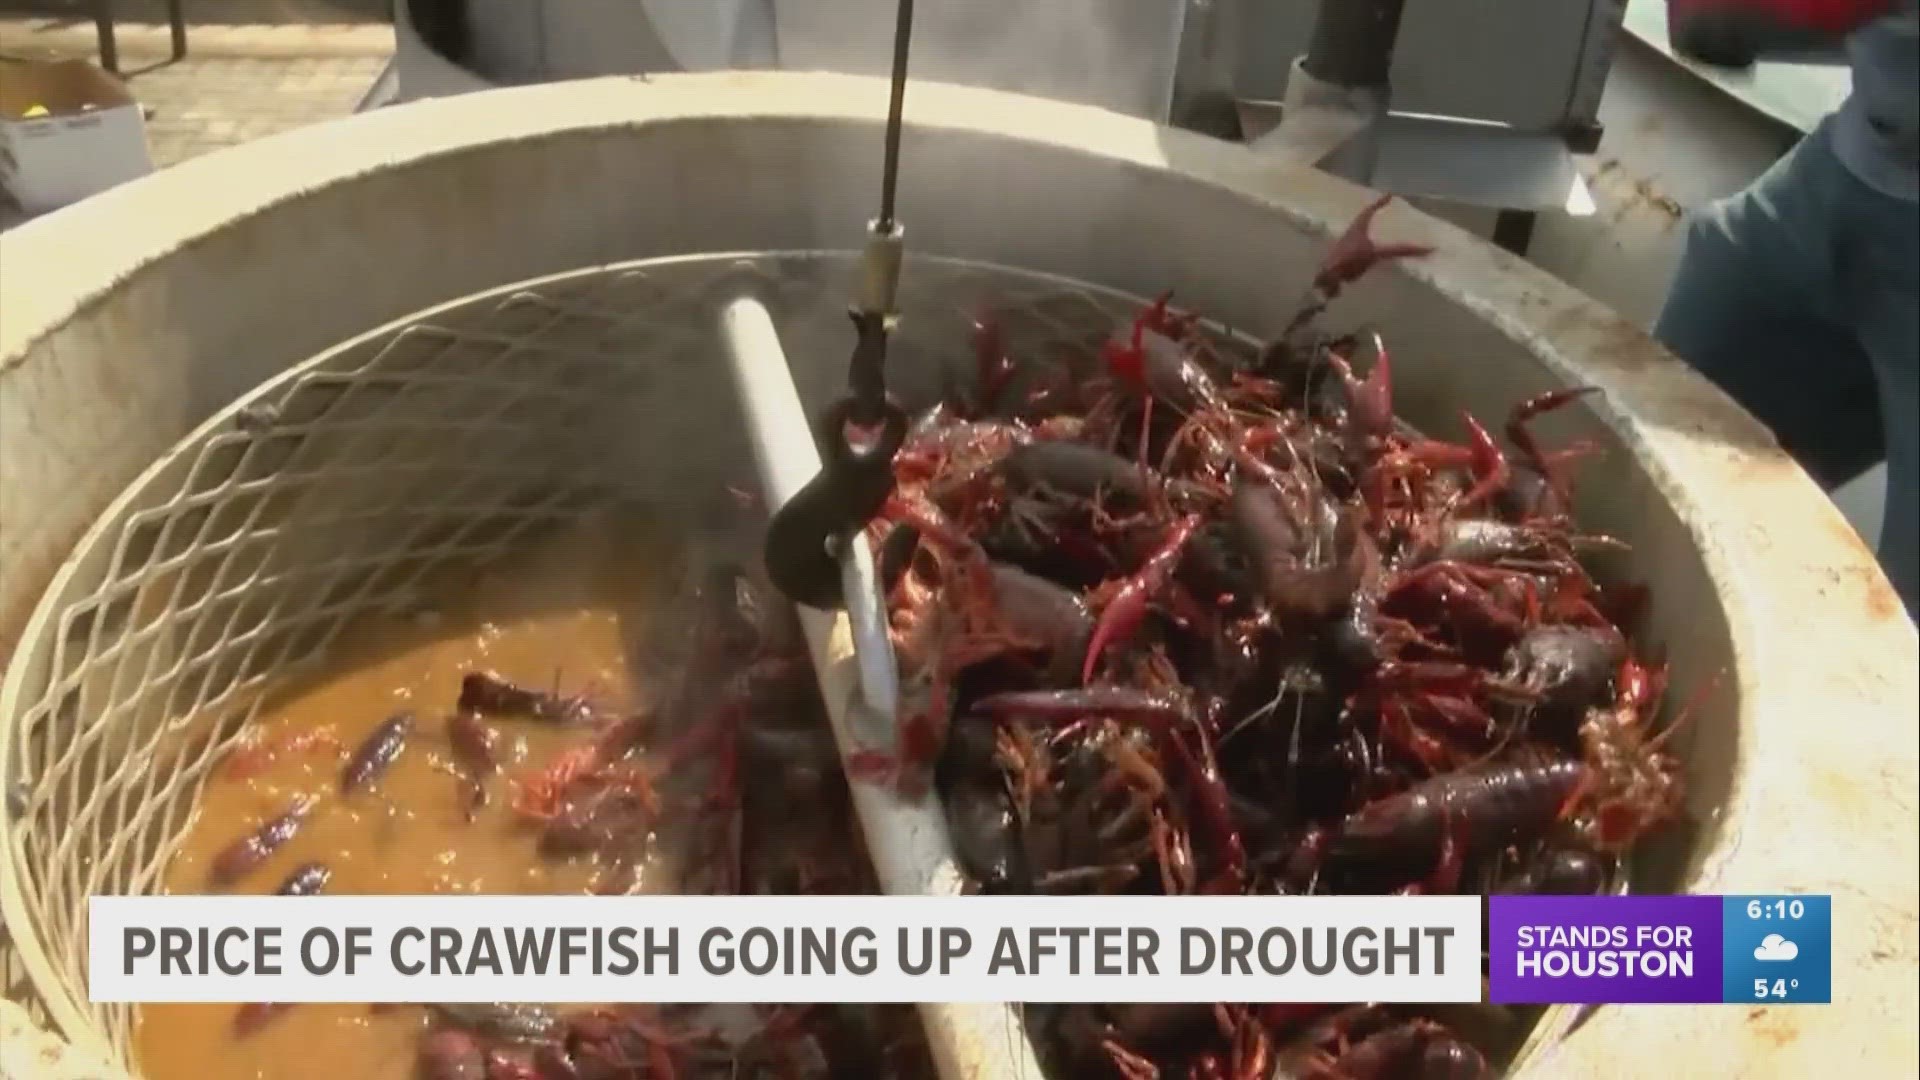 The price you typically pay for a 3-pound bag of crawfish may be a little more this season.